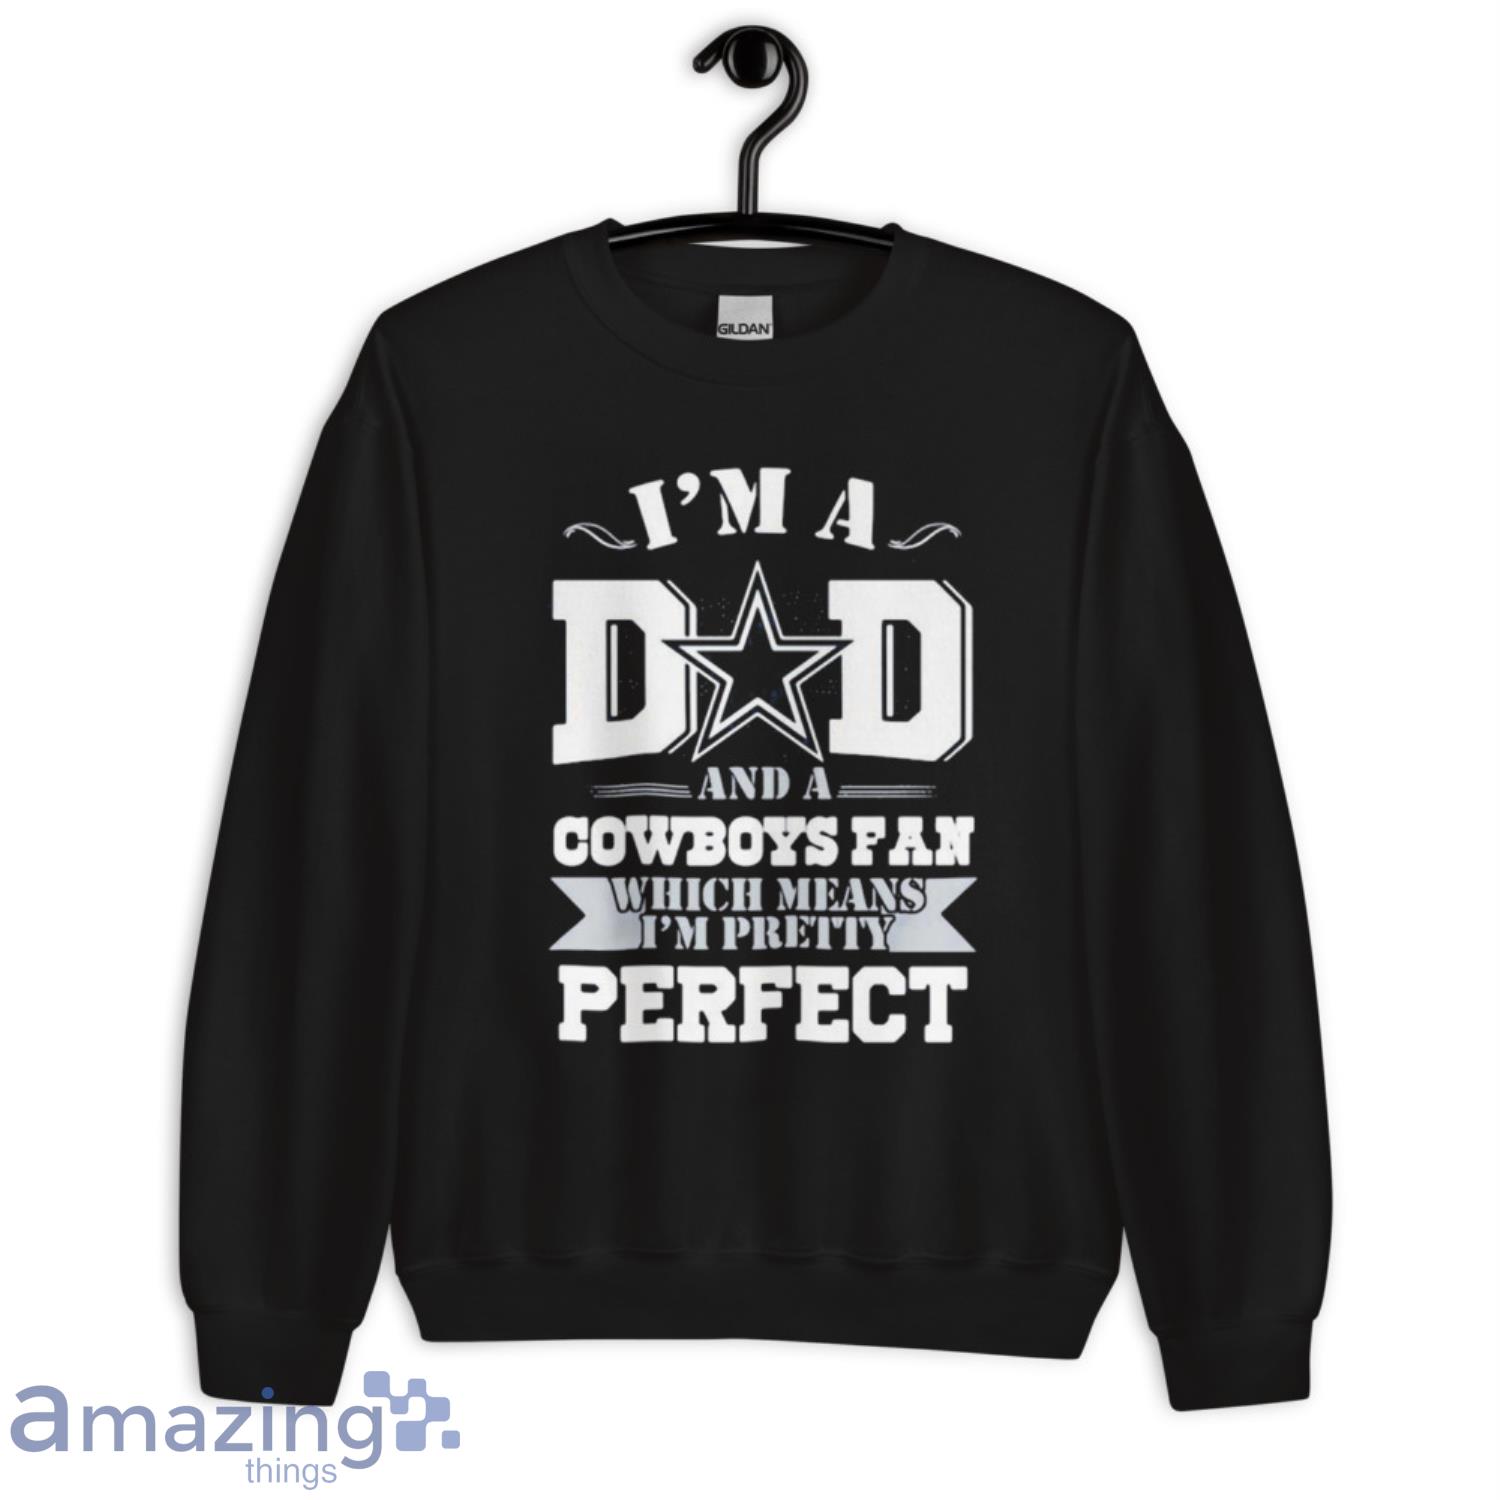 I'm a dad and a dallas cowboys fan which means I'm pretty perfect happy  father's day shirt